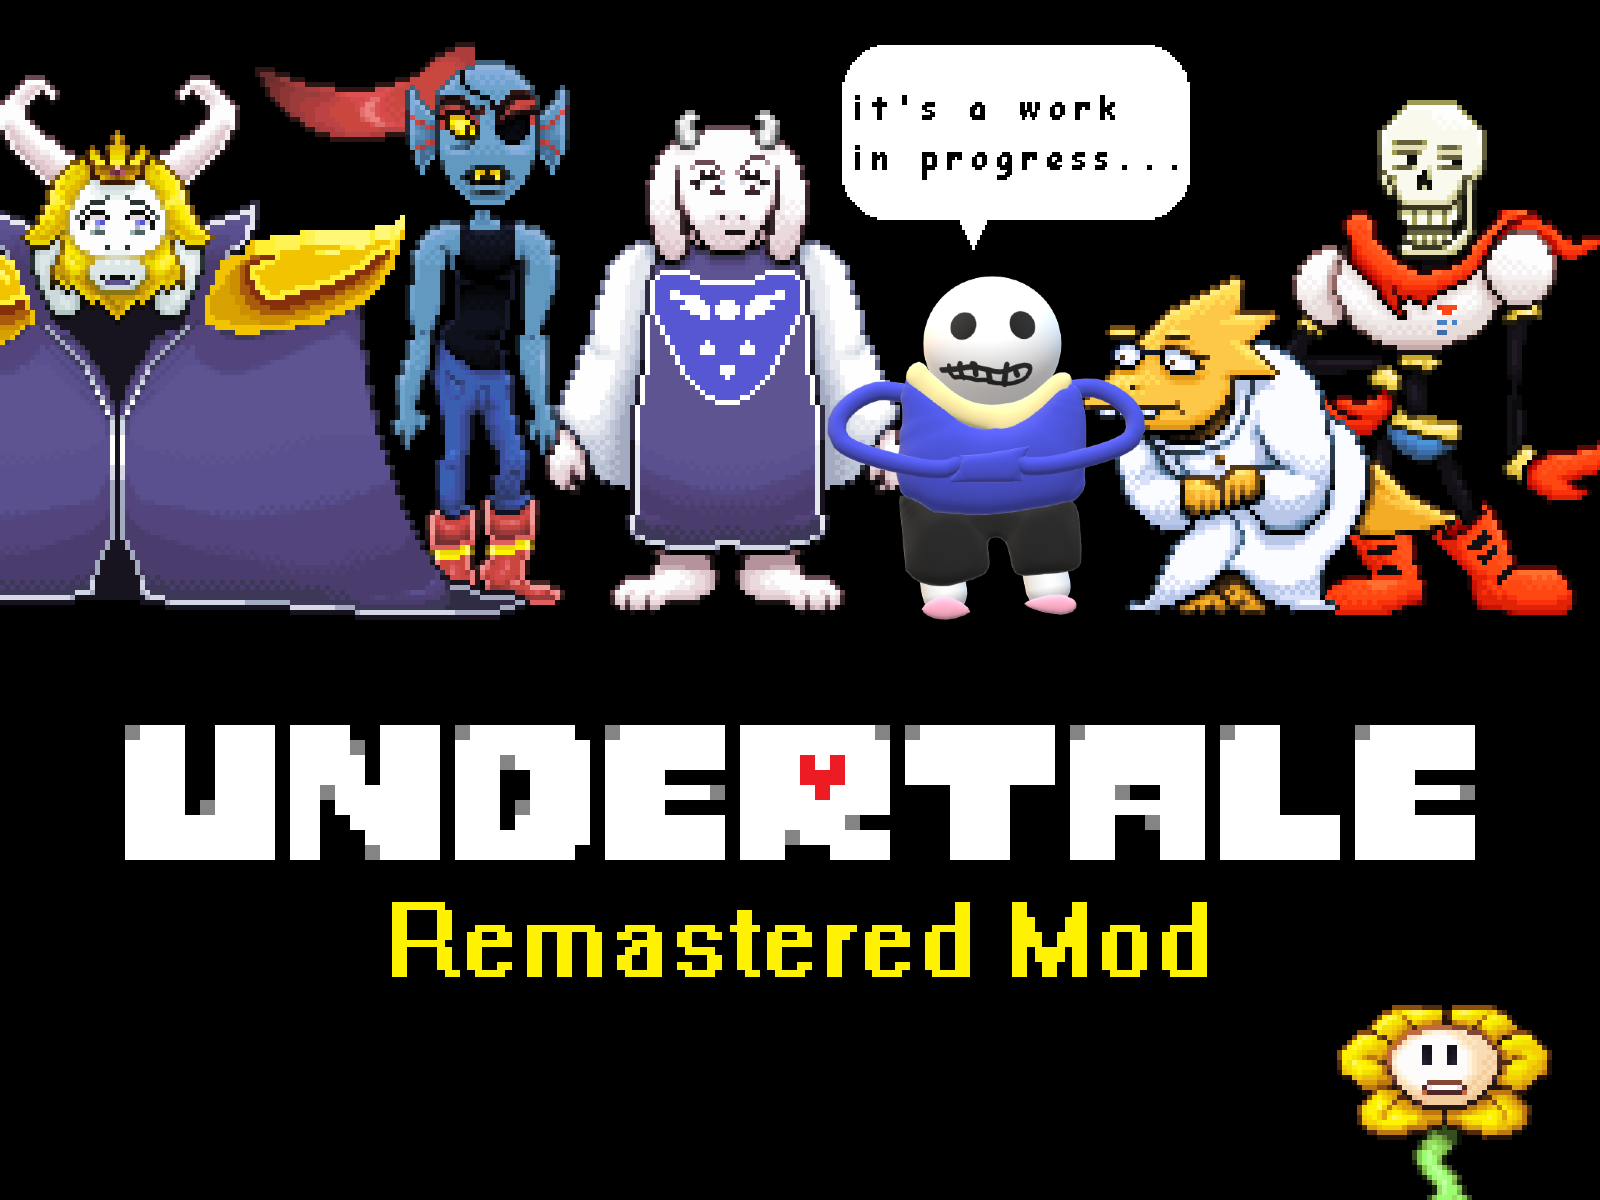 Undertale Full Android - Colaboratory